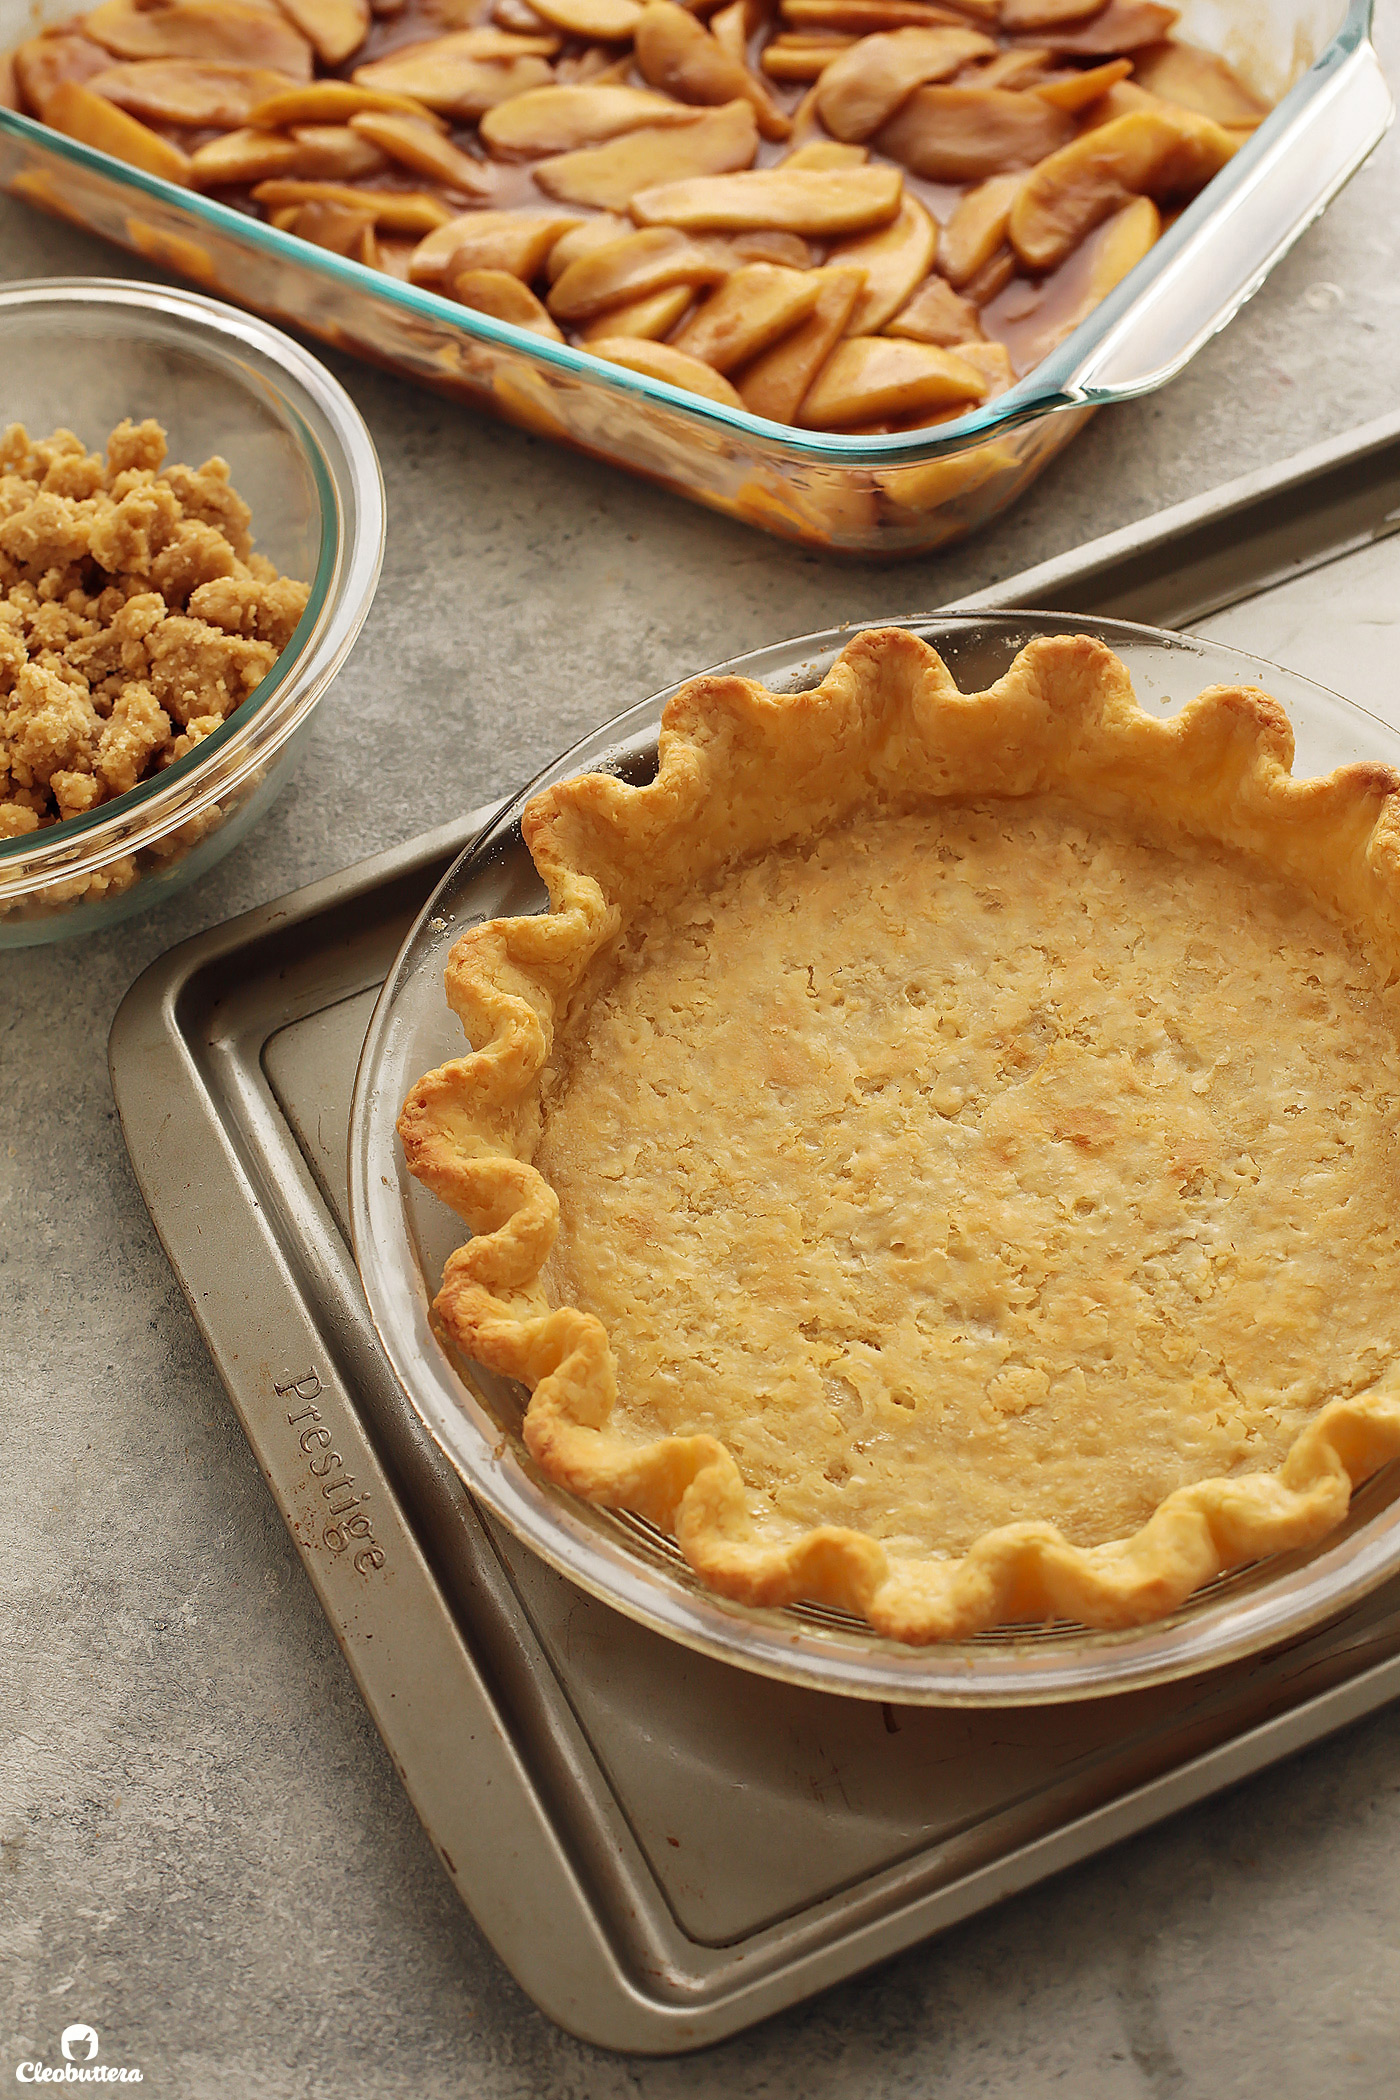 Forget everything you know about pie crust making!  This recipe uses an unconventional mixing method, to create the flakiest, most flavorful all-butter pie crust, that is a breeze to roll out, without the use of unusual ingredients.  It's a game-changer!